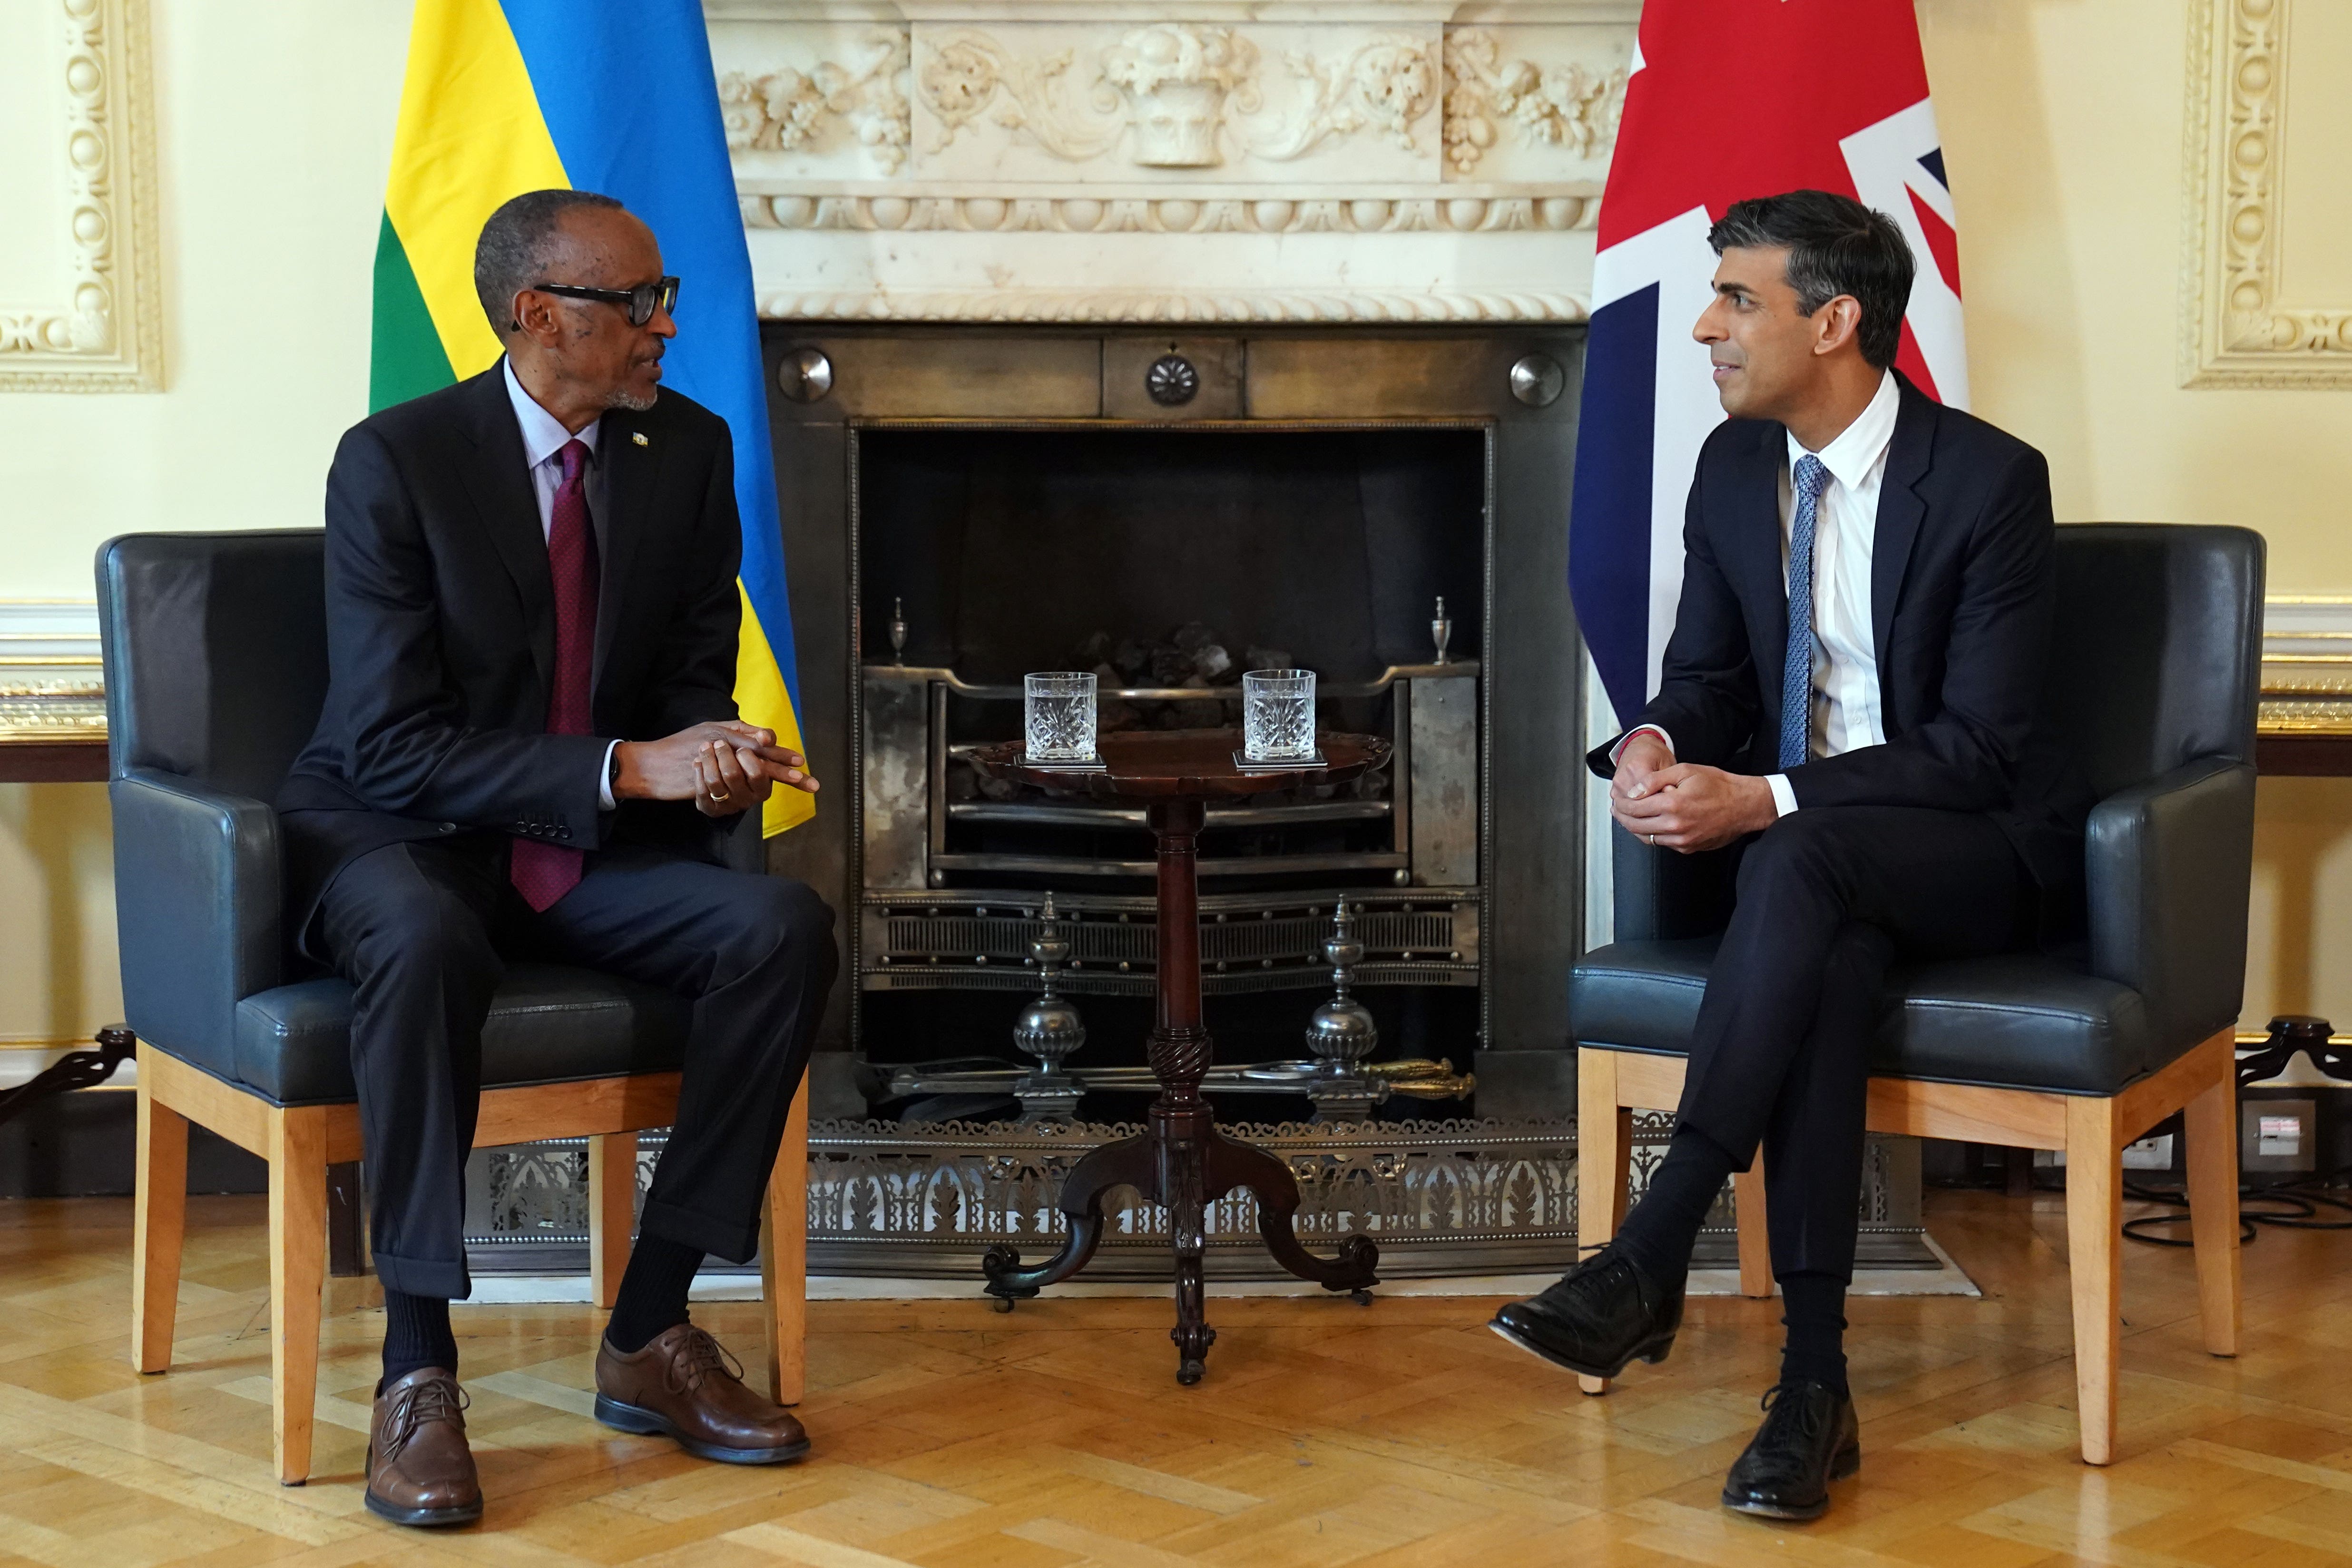 Asked by the BBC if the UK’s plan was working and if Rwanda was a safe country for refugees, Paul Kagame said it was ‘the UK’s problem’ (Stefan Rousseau/PA)